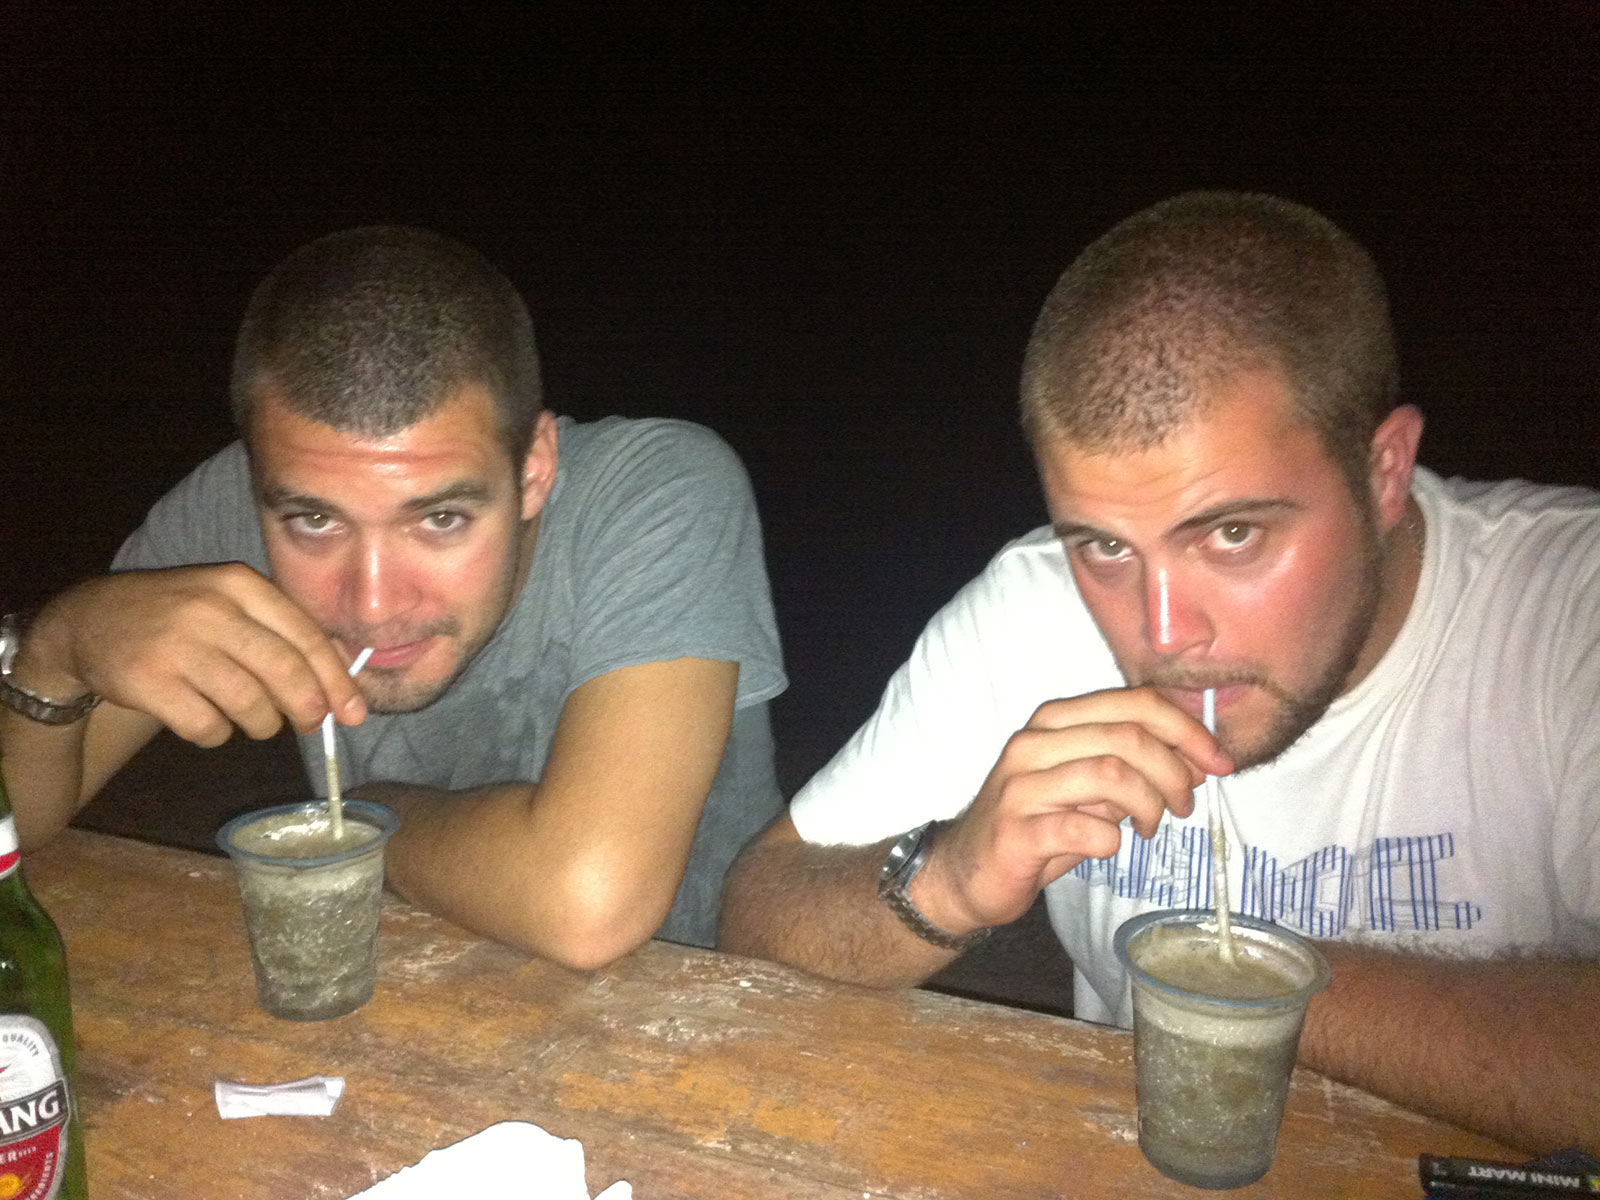 Two guys drinking beer with straw in Gili T. My first taste of Asia